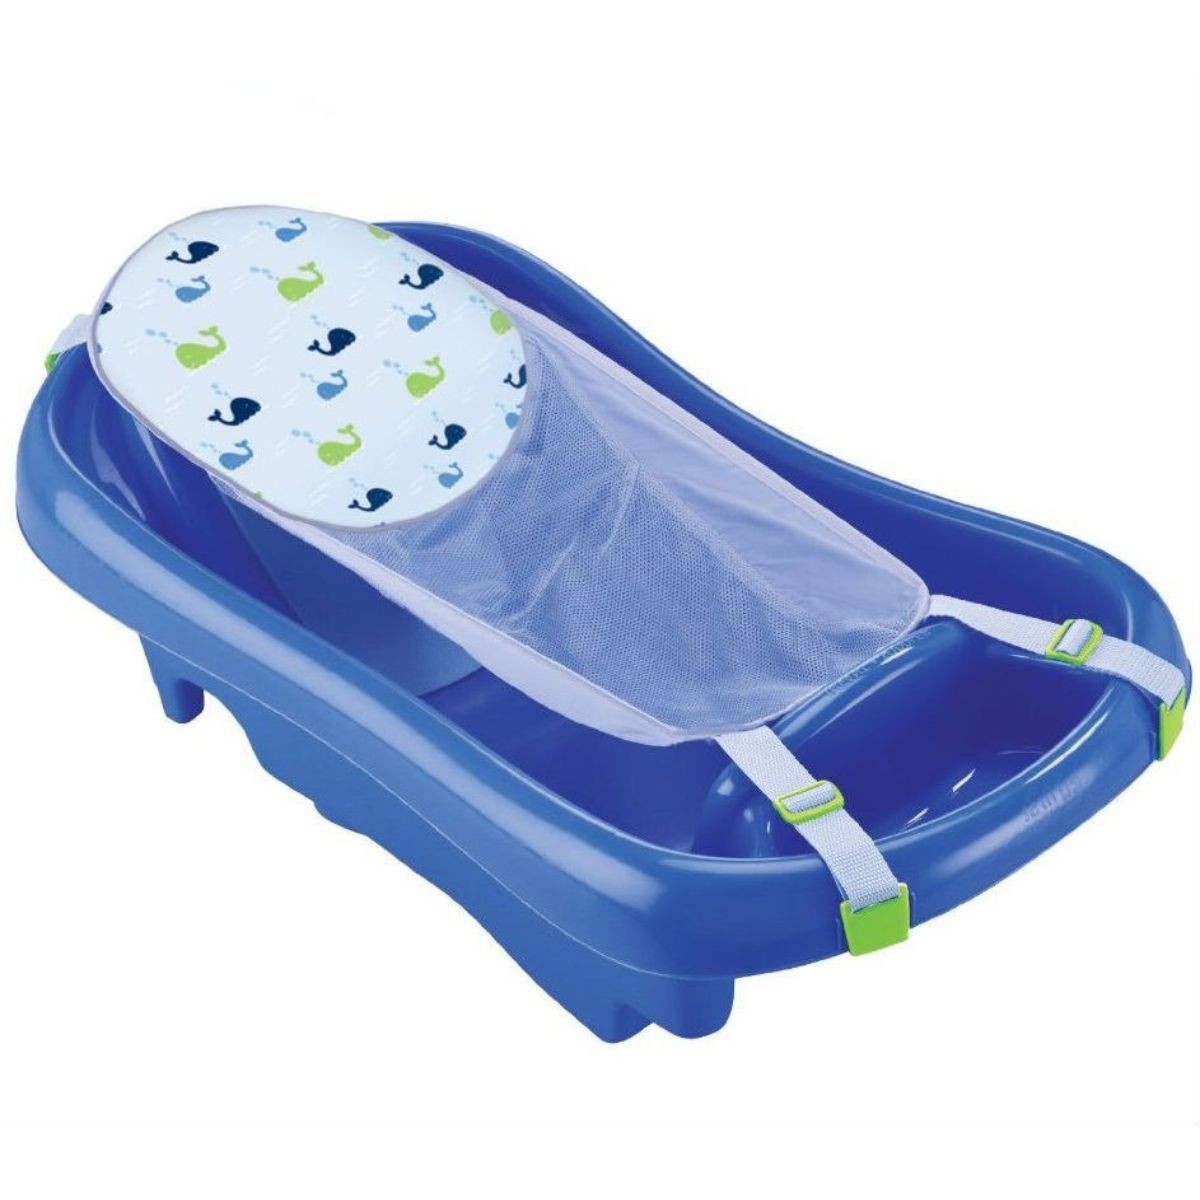 THE FIRST YEARS BAÑERA DELUXE AJUSTABLE AZUL